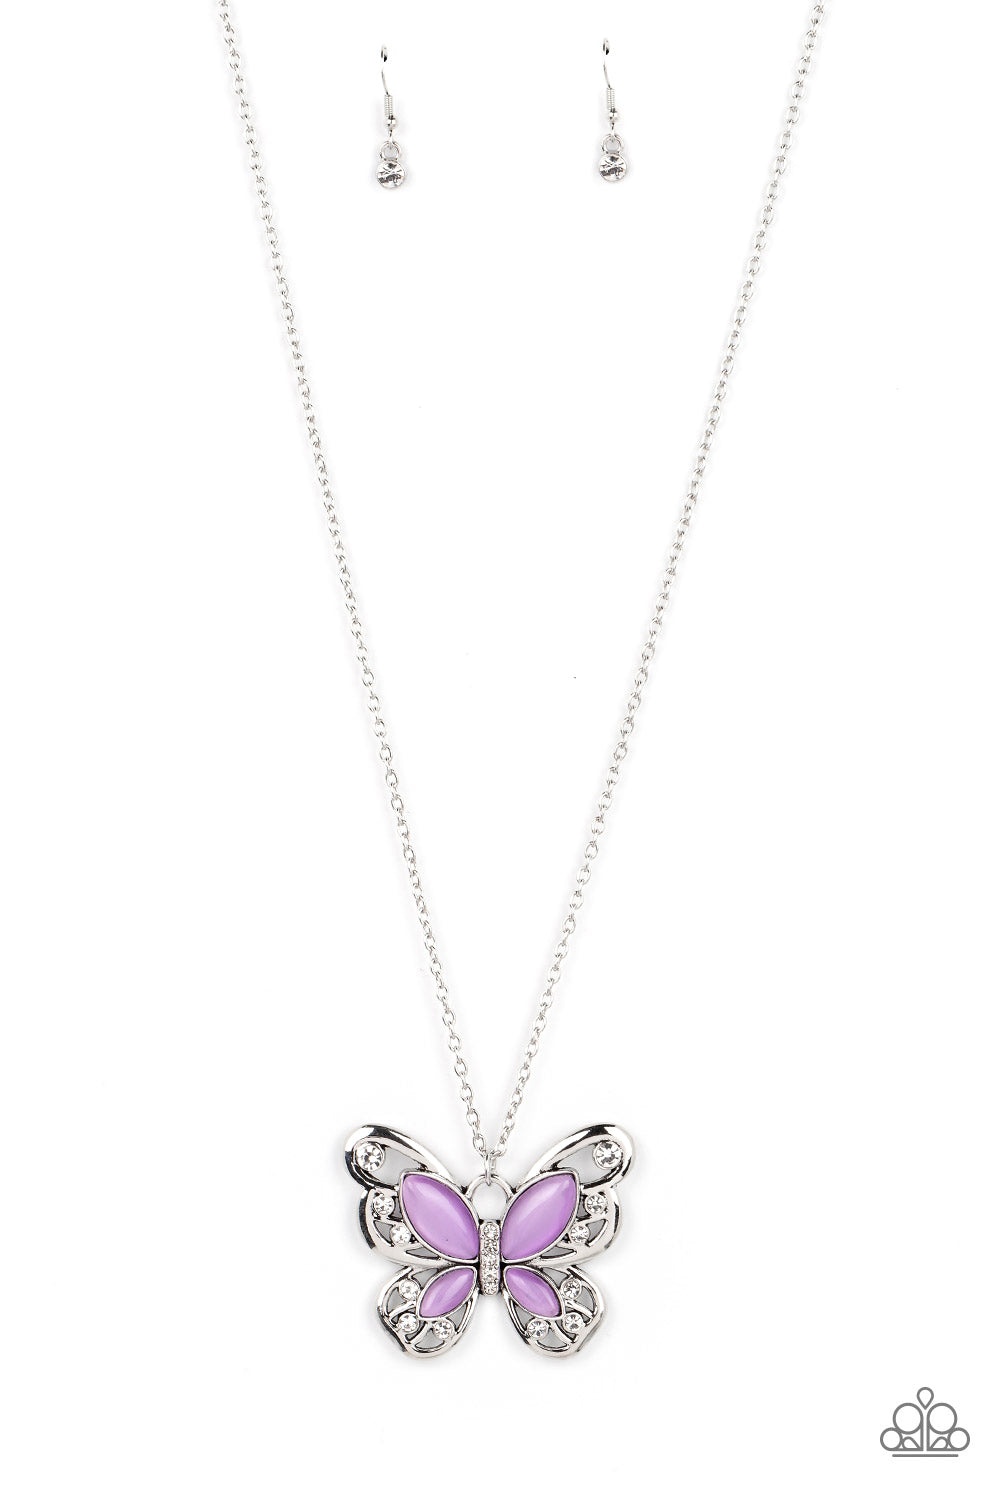 WINGS OF WHIMSY PURPLE-NECKLACE